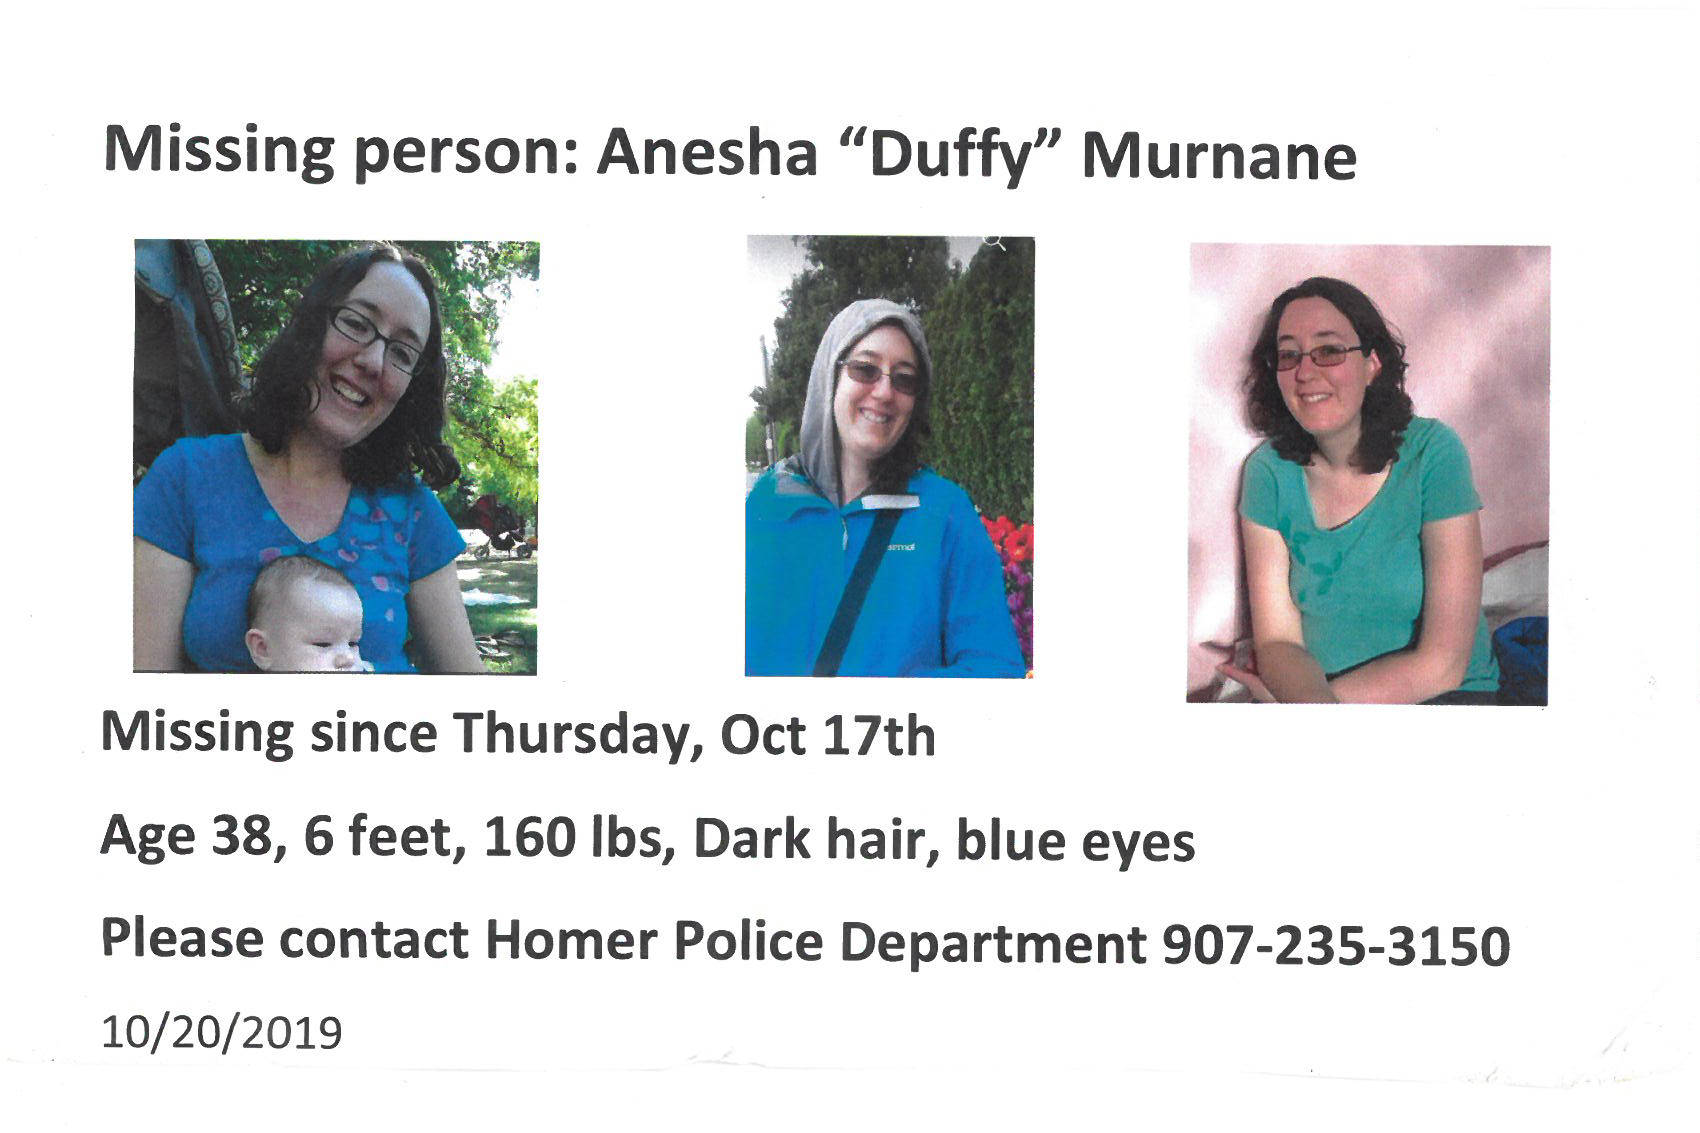 A missing person poster for Anesha “Duffy” Murnane put out on Oct. 20, 2019, by Homer Police in Homer, Alaska. (Image provided)